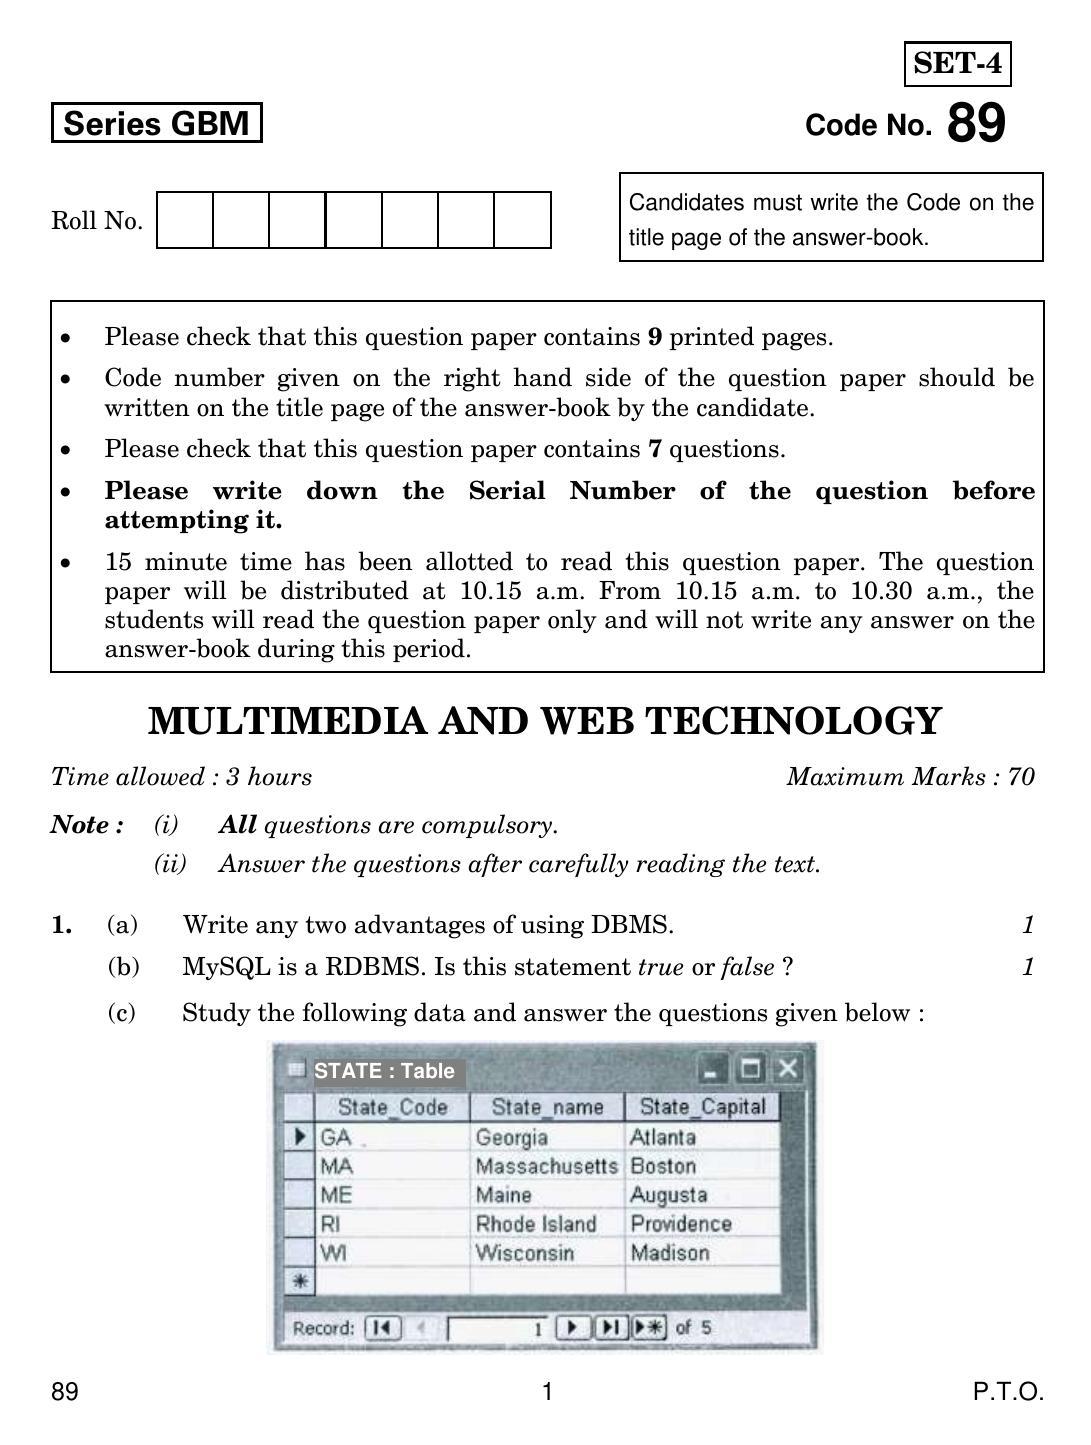 CBSE Class 12 89 MULTIMEDIA AND WEB TECHNOLOGY 2017 Question Paper - Page 1